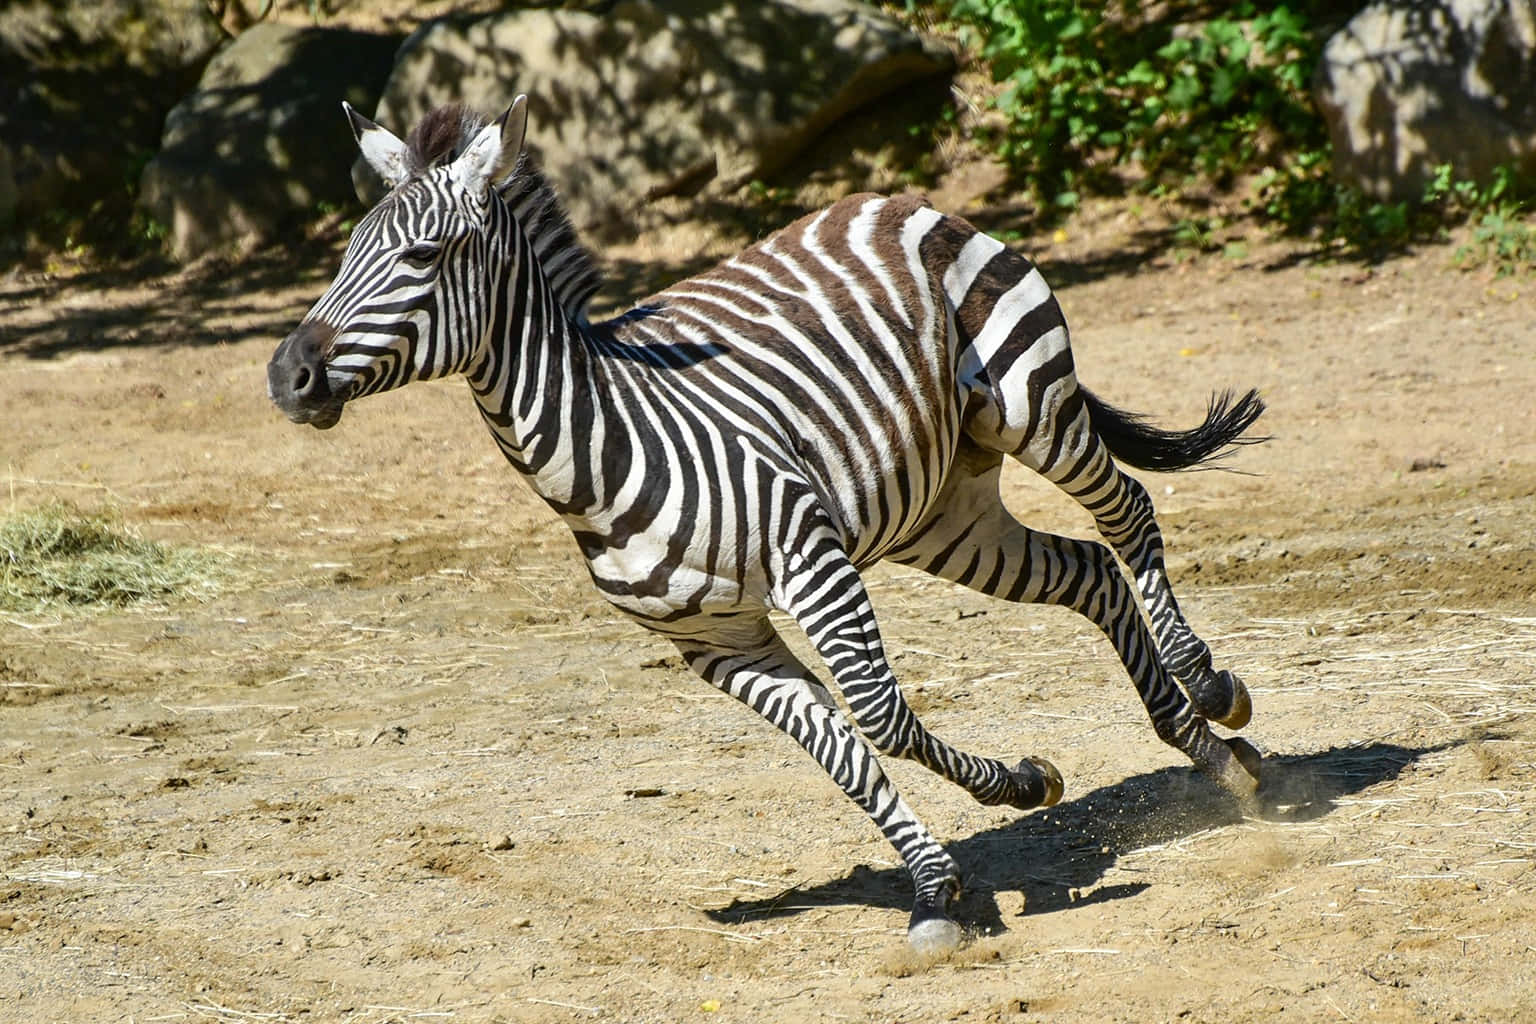 A close-up view of an adorable zebra